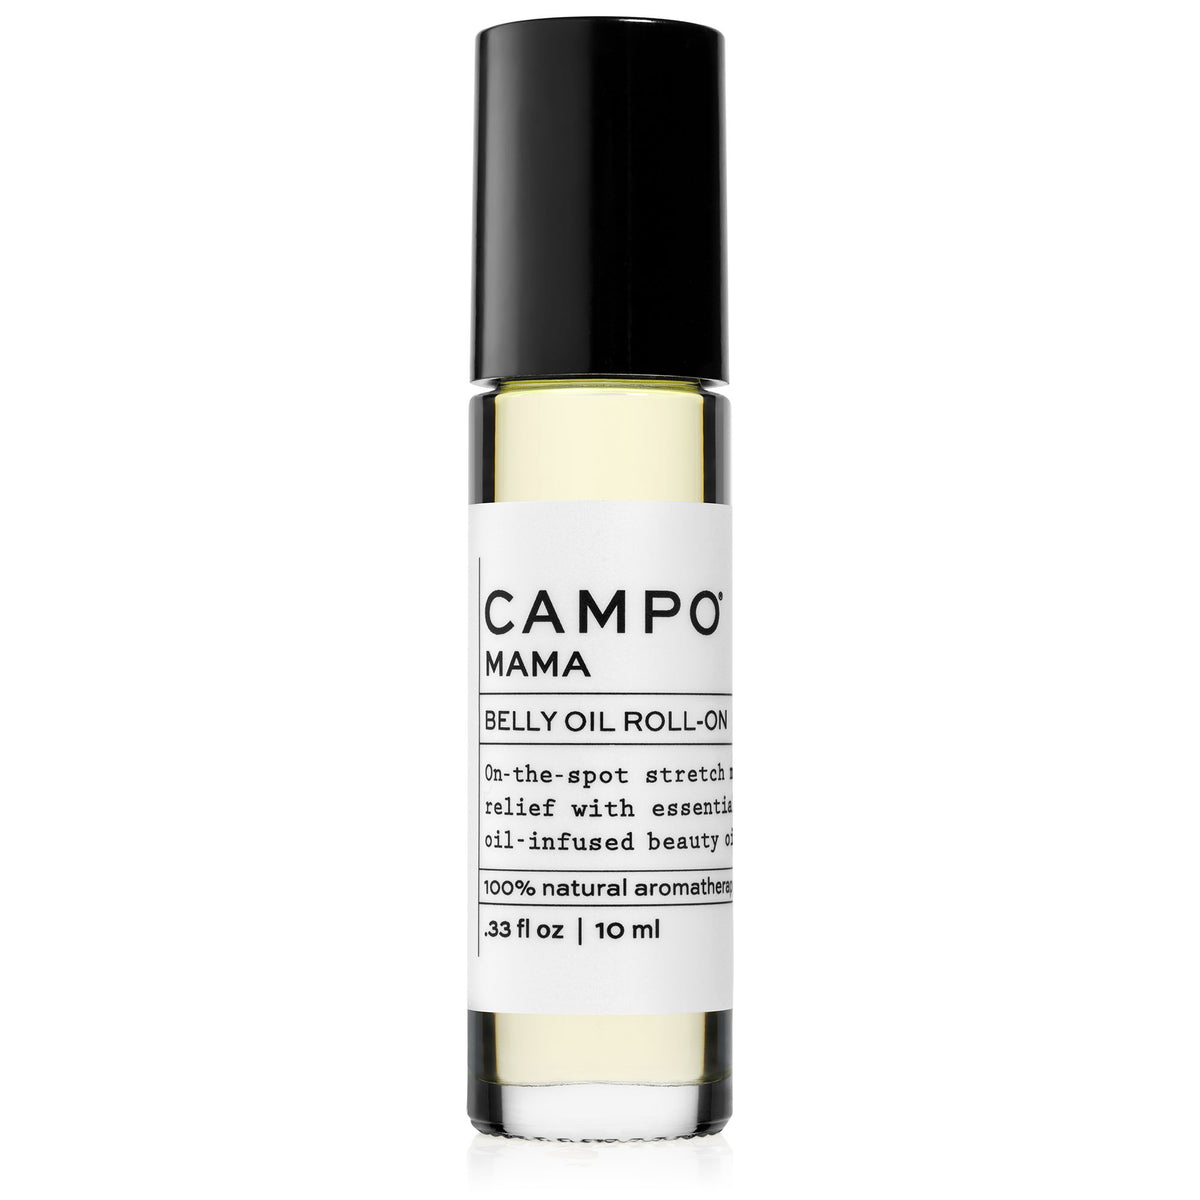 Campo Beauty Essential Oil MAMA Stretch Mark Relief Blend Roll-On that in 10 ml. On-the-spot relief of stretched skin with 100% natural nourishing plant-derived oils and pure essential oils of grapefruit, neroli orange blossom, and bergamot. Help prevent stretch marks and soothe the itch as you feel grounded and uplifted. It&#39;s pre-blended with 100% natural beauty carrier oils so it&#39;s ready to roll with you as you grow.